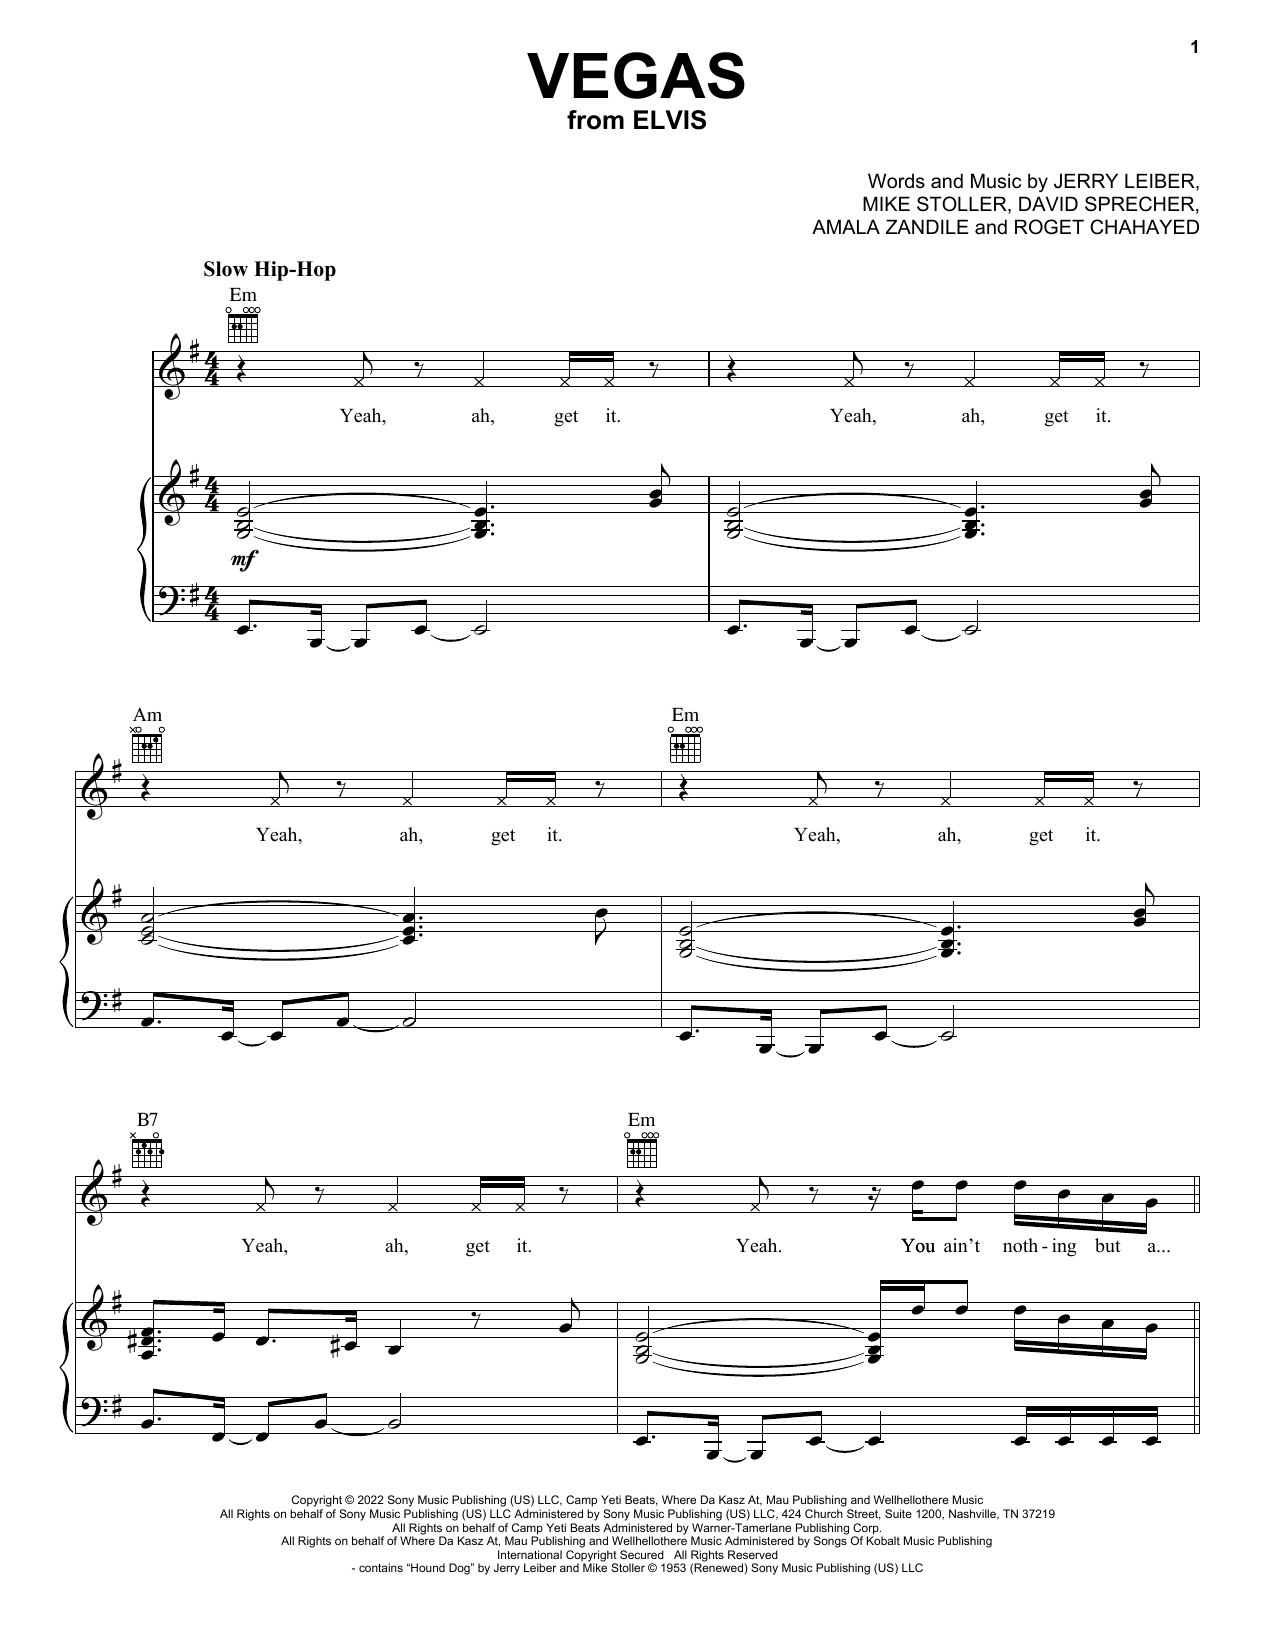 Doja Cat Vegas (from ELVIS) sheet music notes and chords. Download Printable PDF.